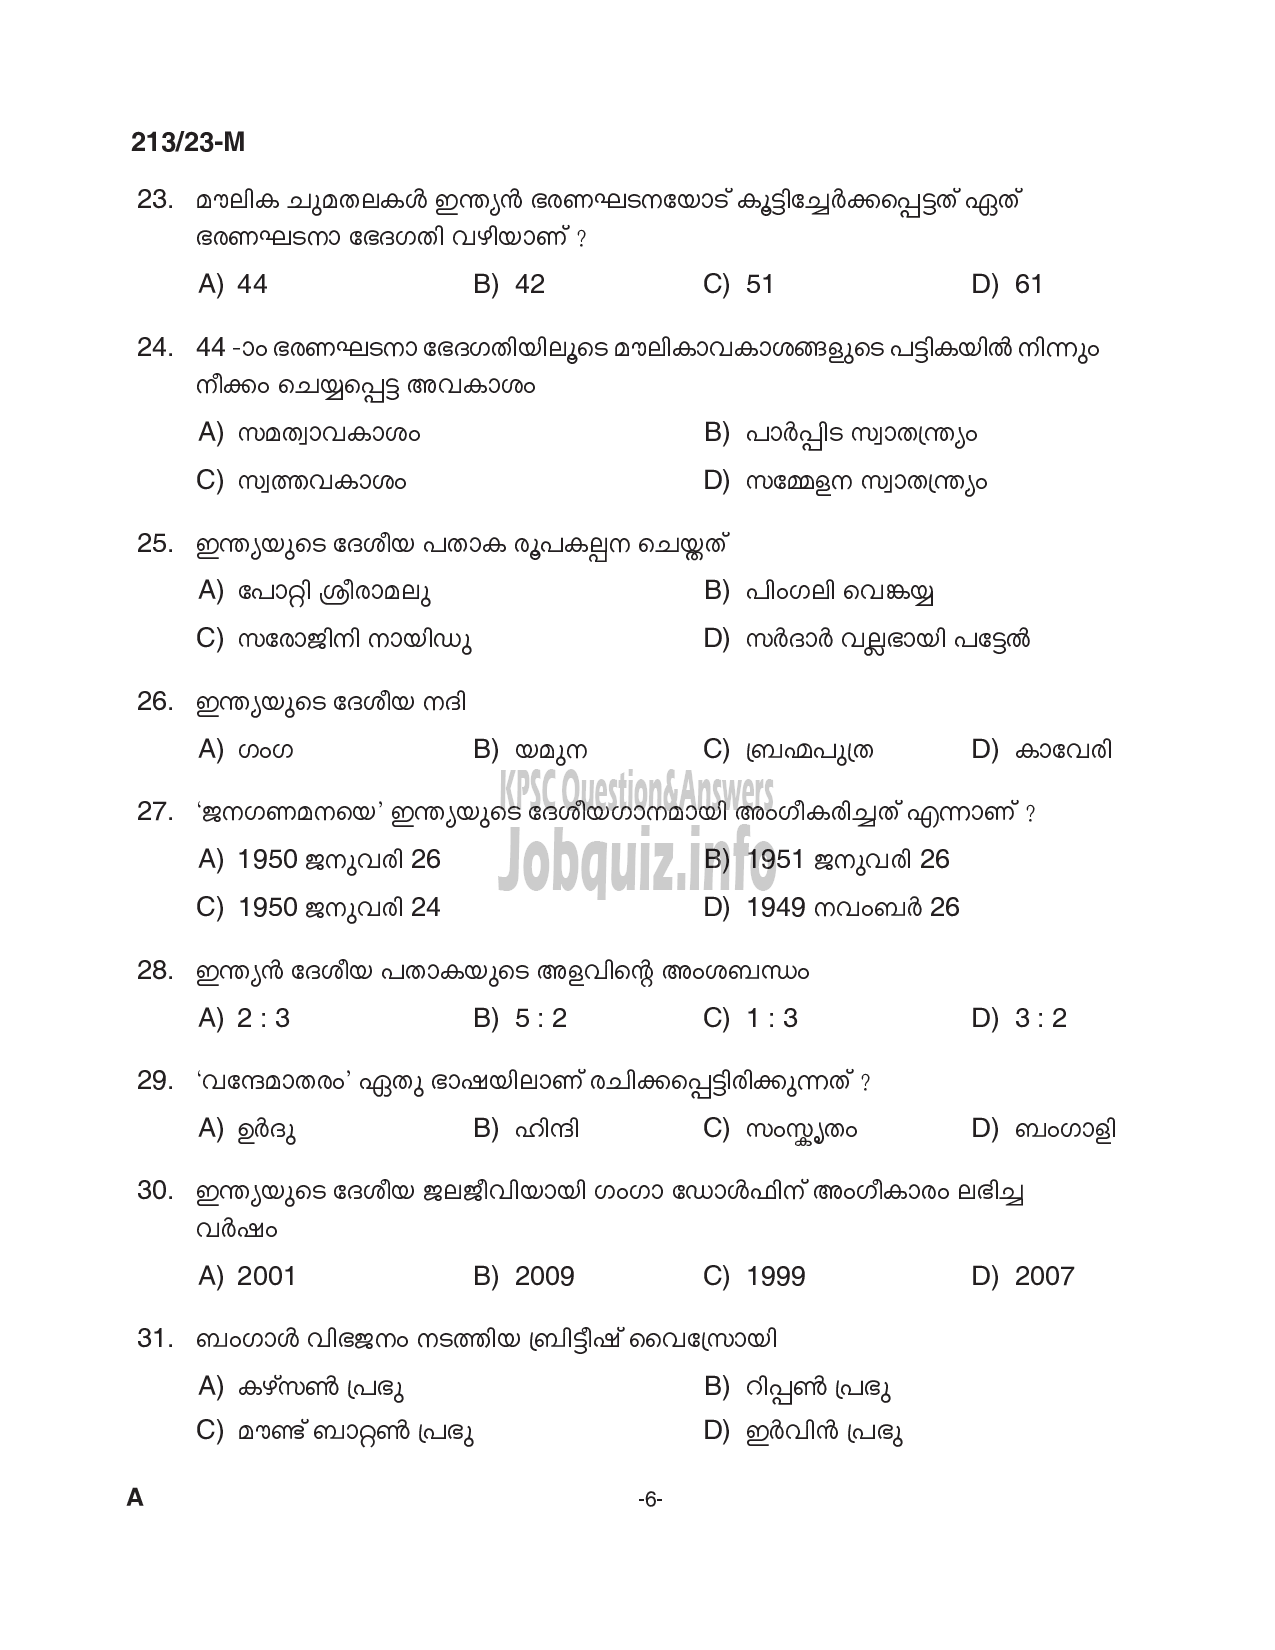 Kerala PSC Question Paper - Cooly Worker, LGS, Office Attendant Gr II/ Messenger/ Night Watchman, Farm Worker, Ambulance Assistant (Preliminary Examination Stage V) -6